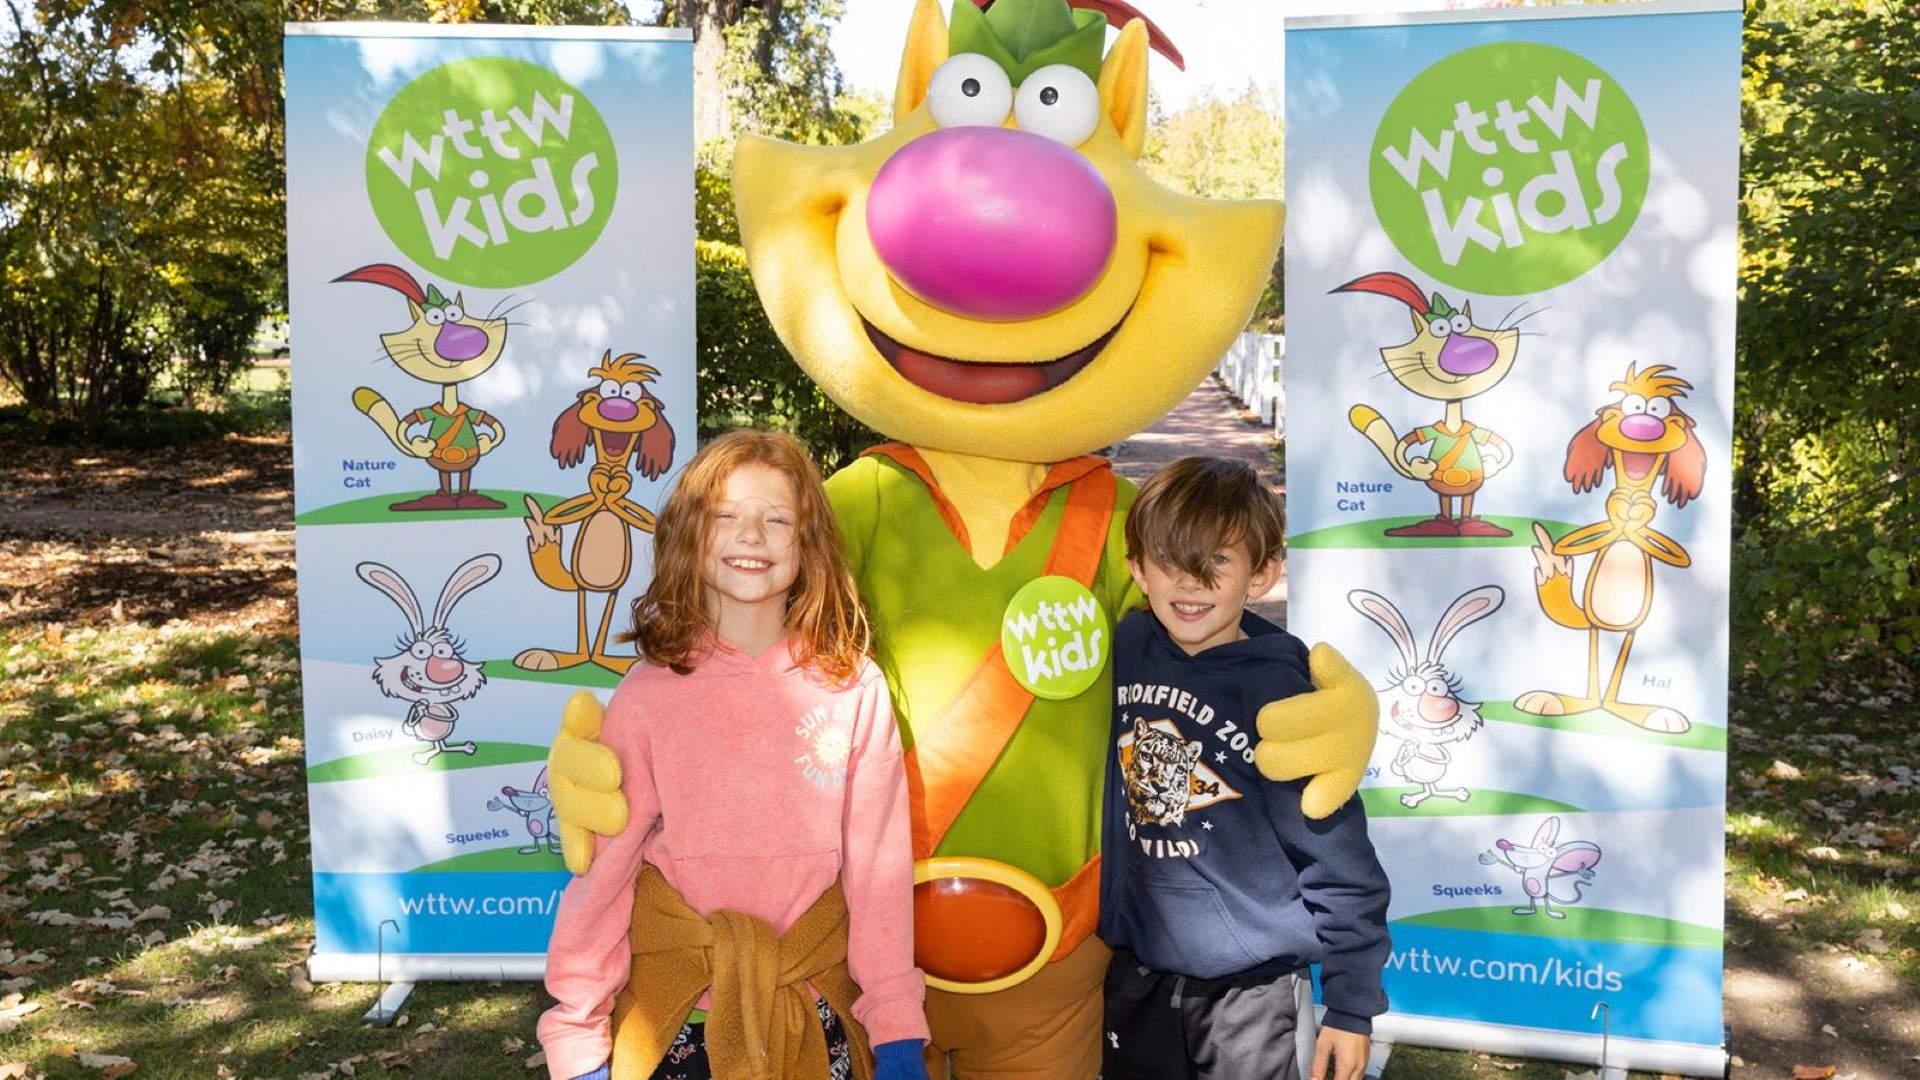 Two young children get a hug from Nature Cat